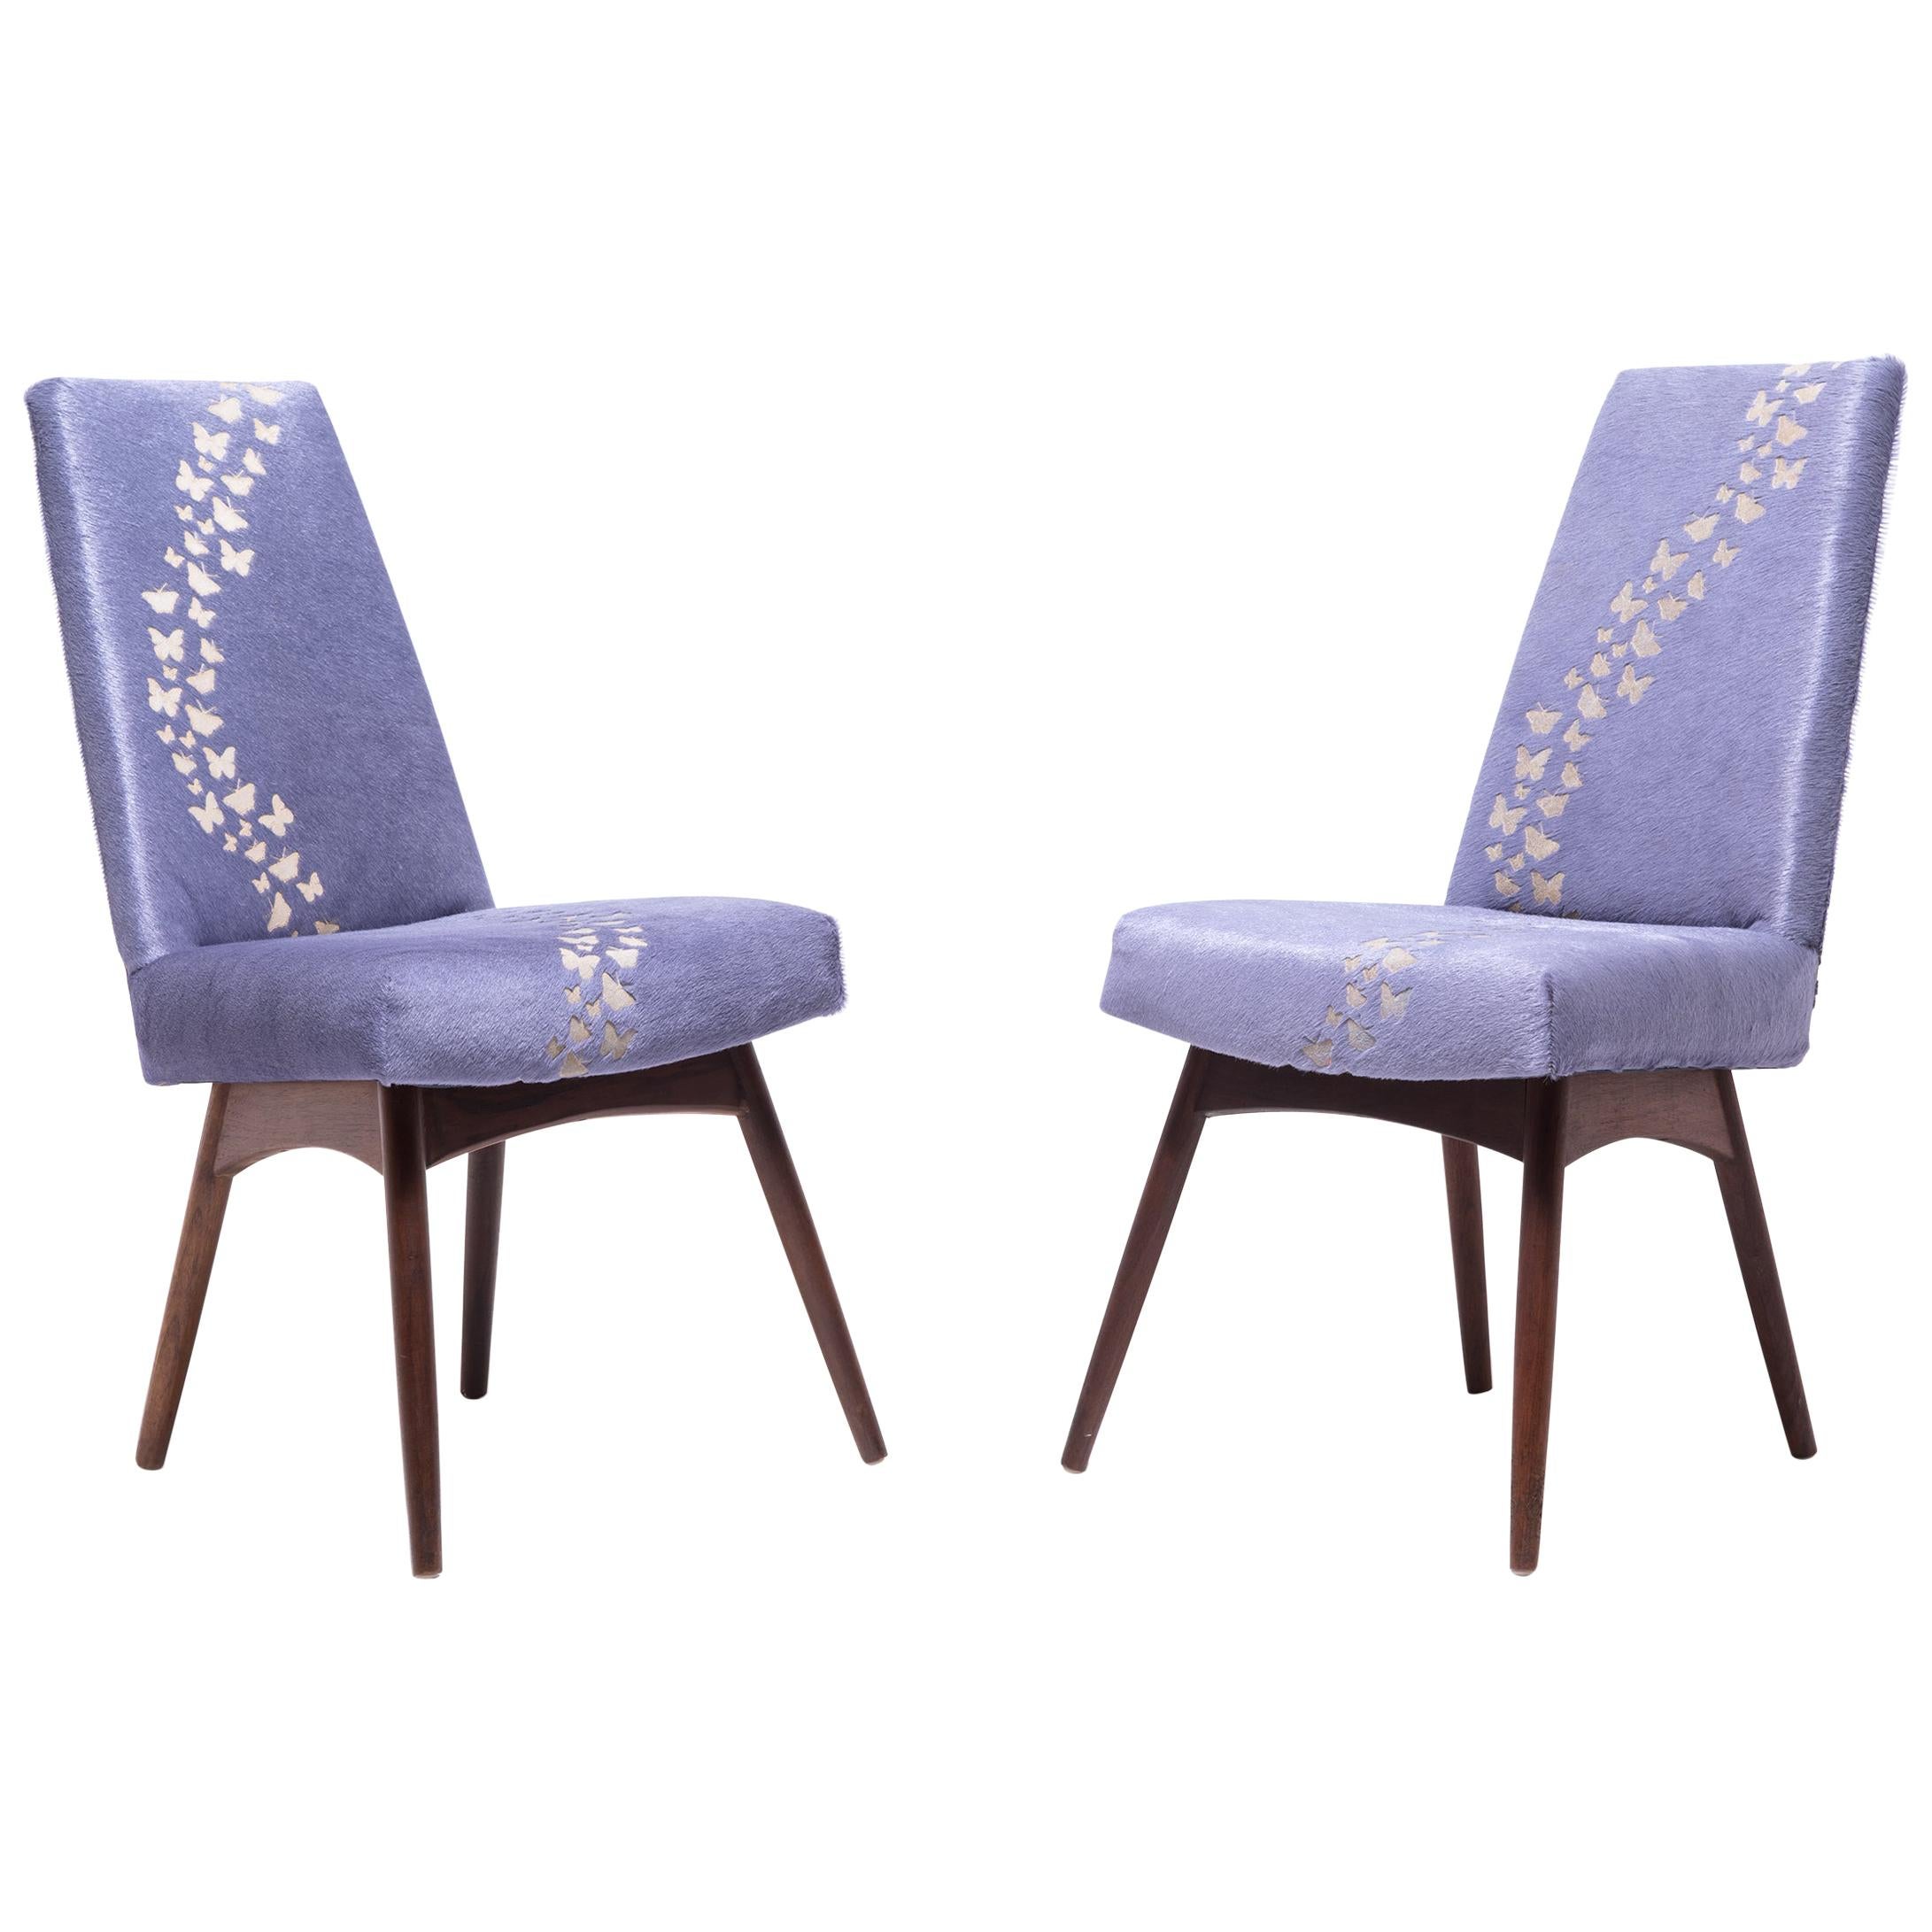 Pair of Vintage Pearsall Chairs with Laser-Cut Butterflies on Hide For Sale